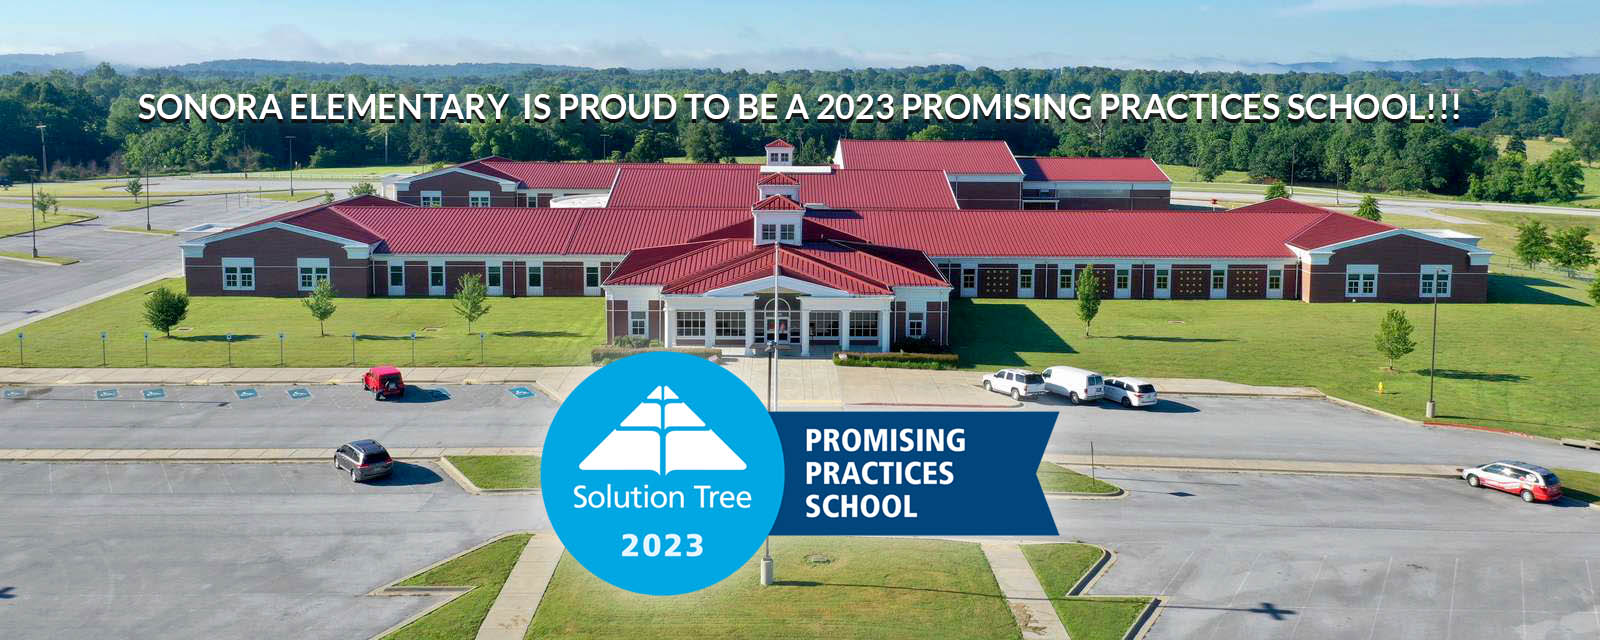 Sonora Elementary is a 2023 Promising Practices School